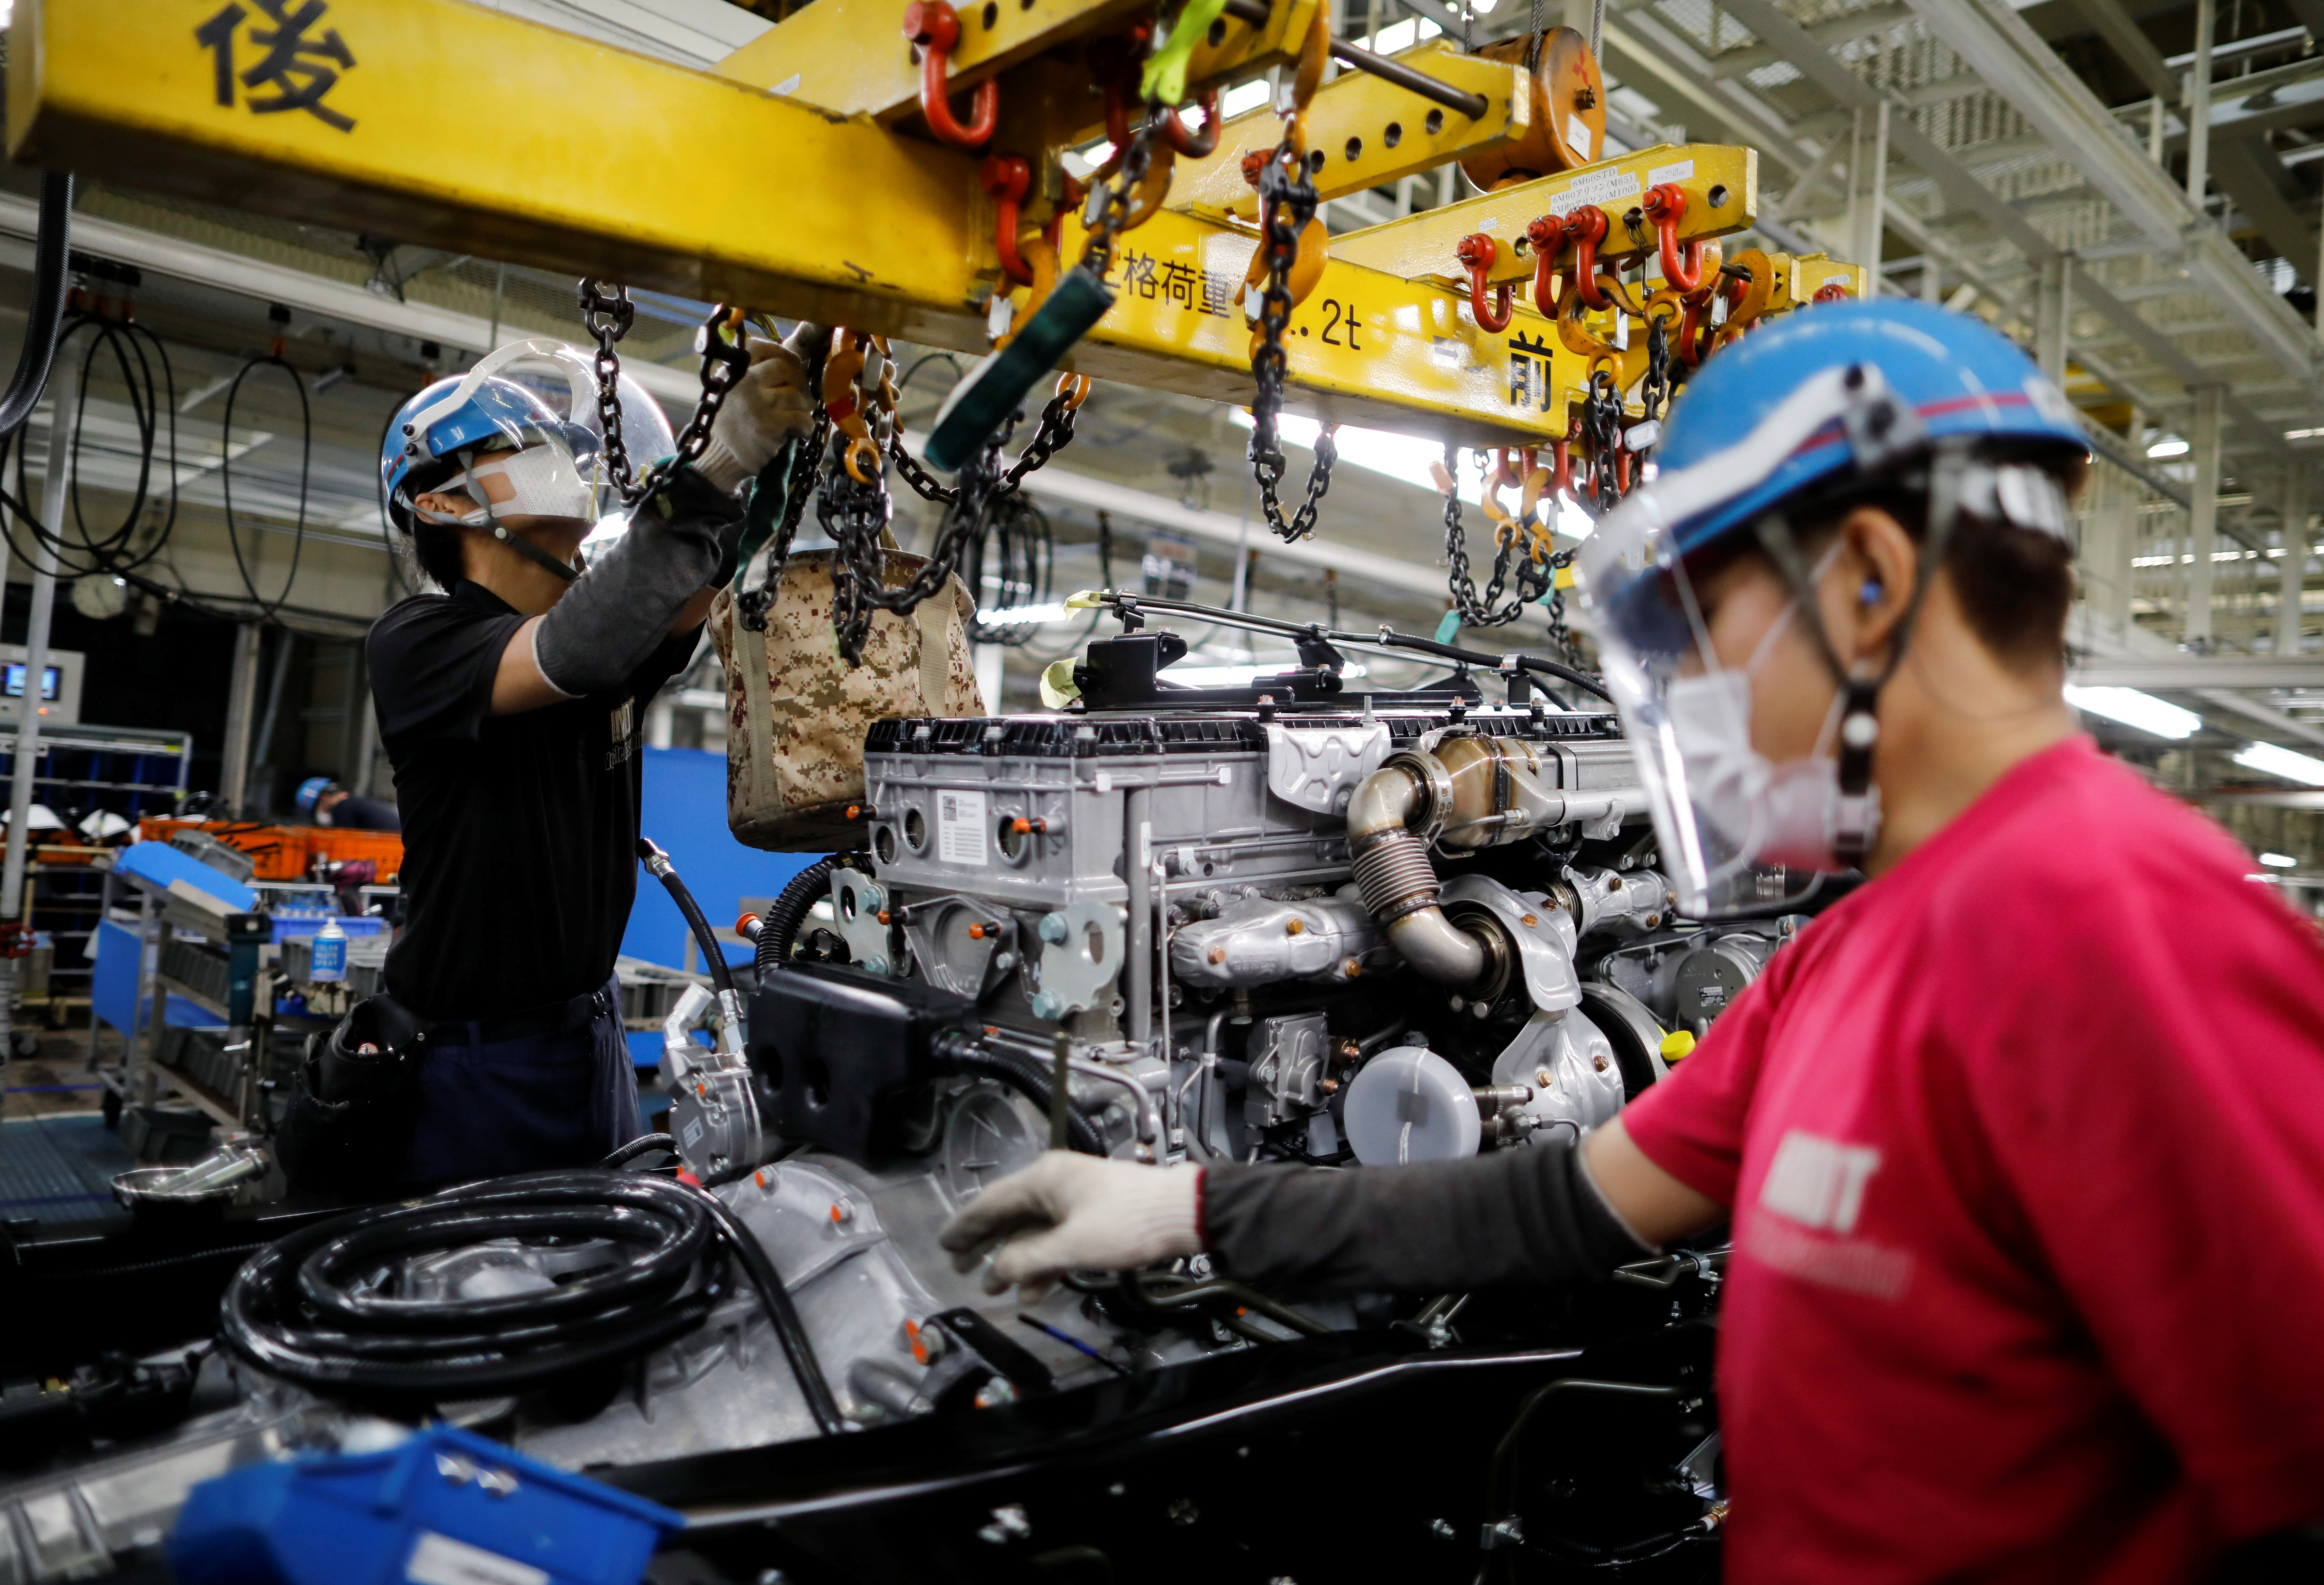 Employees wearing protective face masks and face guards work on the automobile assembly line during the outbreak of the coronavirus disease (COVID-19) at the Kawasaki factory of Mitsubishi Fuso Truck and Bus Corp. in Kawasaki, Japan